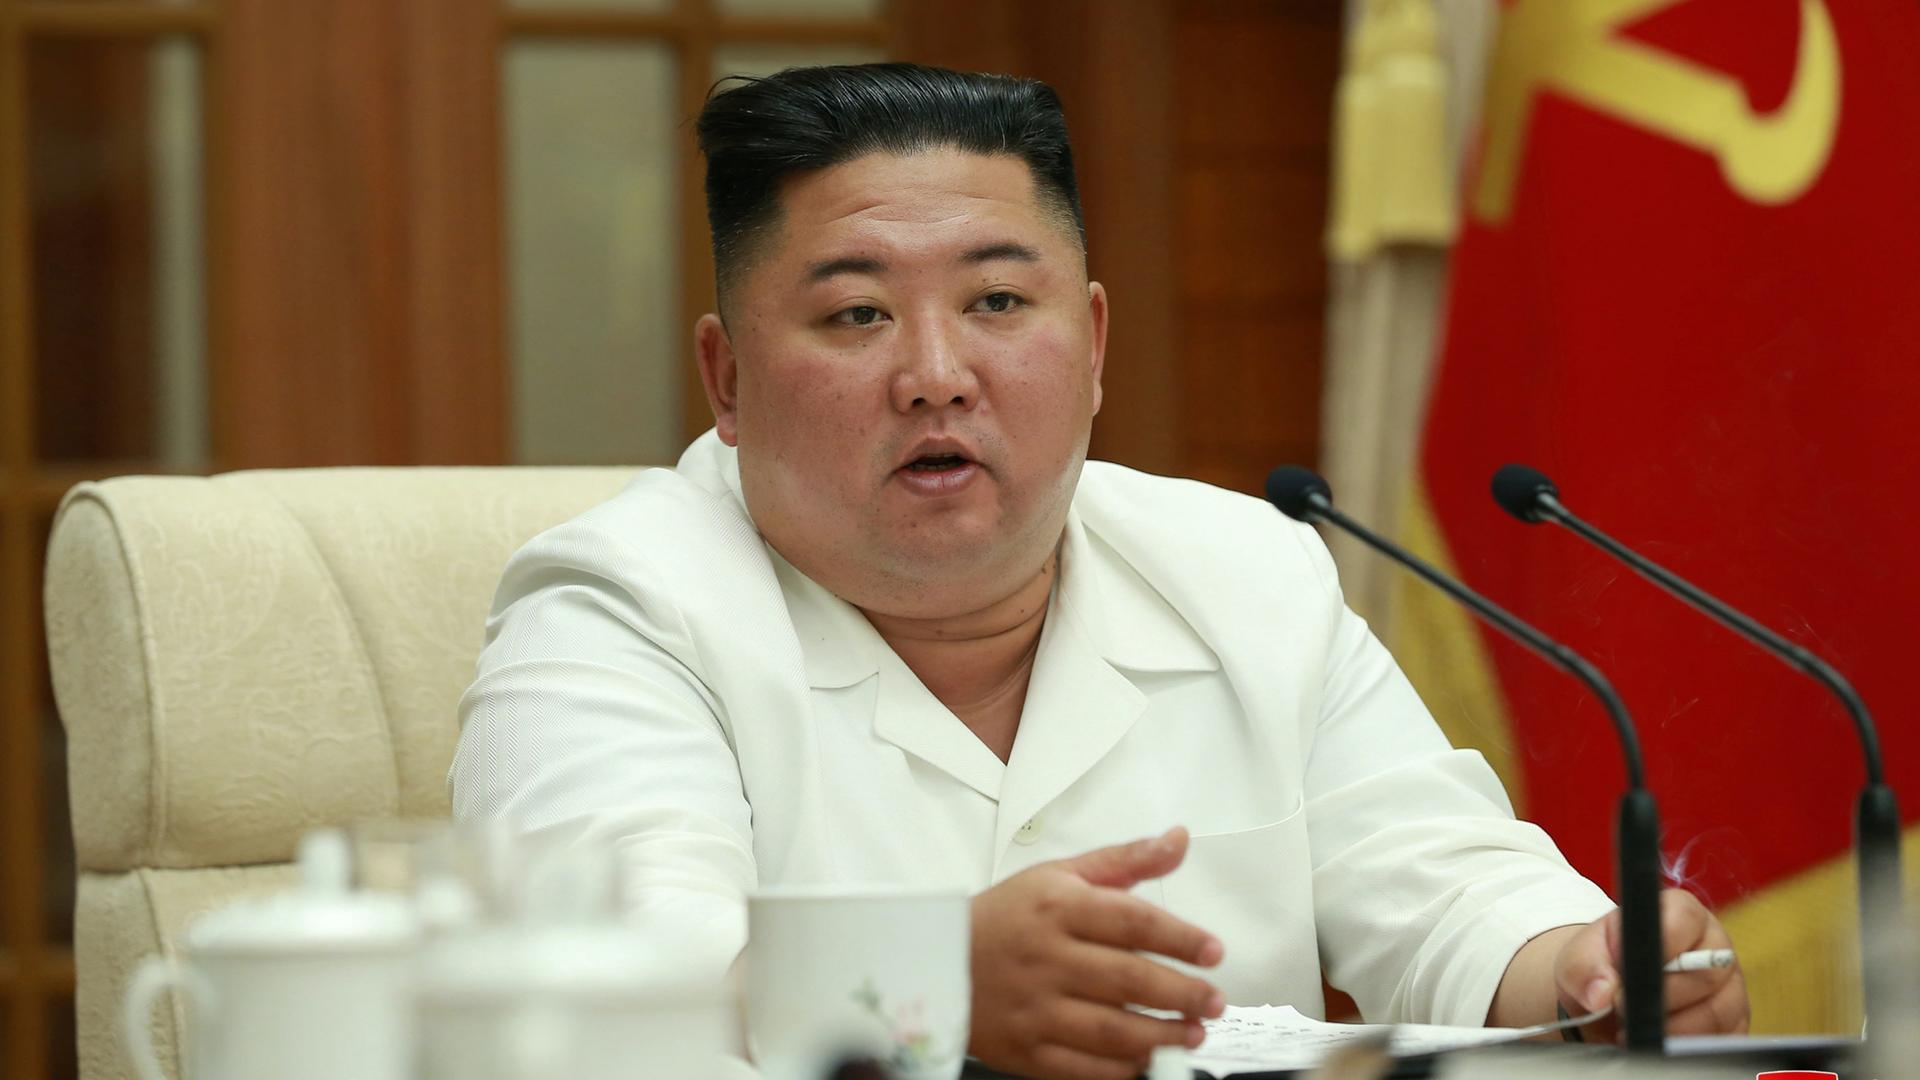 North Korean leader Kim Jong-un, with a white suit and black flat-top hair style, speaks at a conference table. 